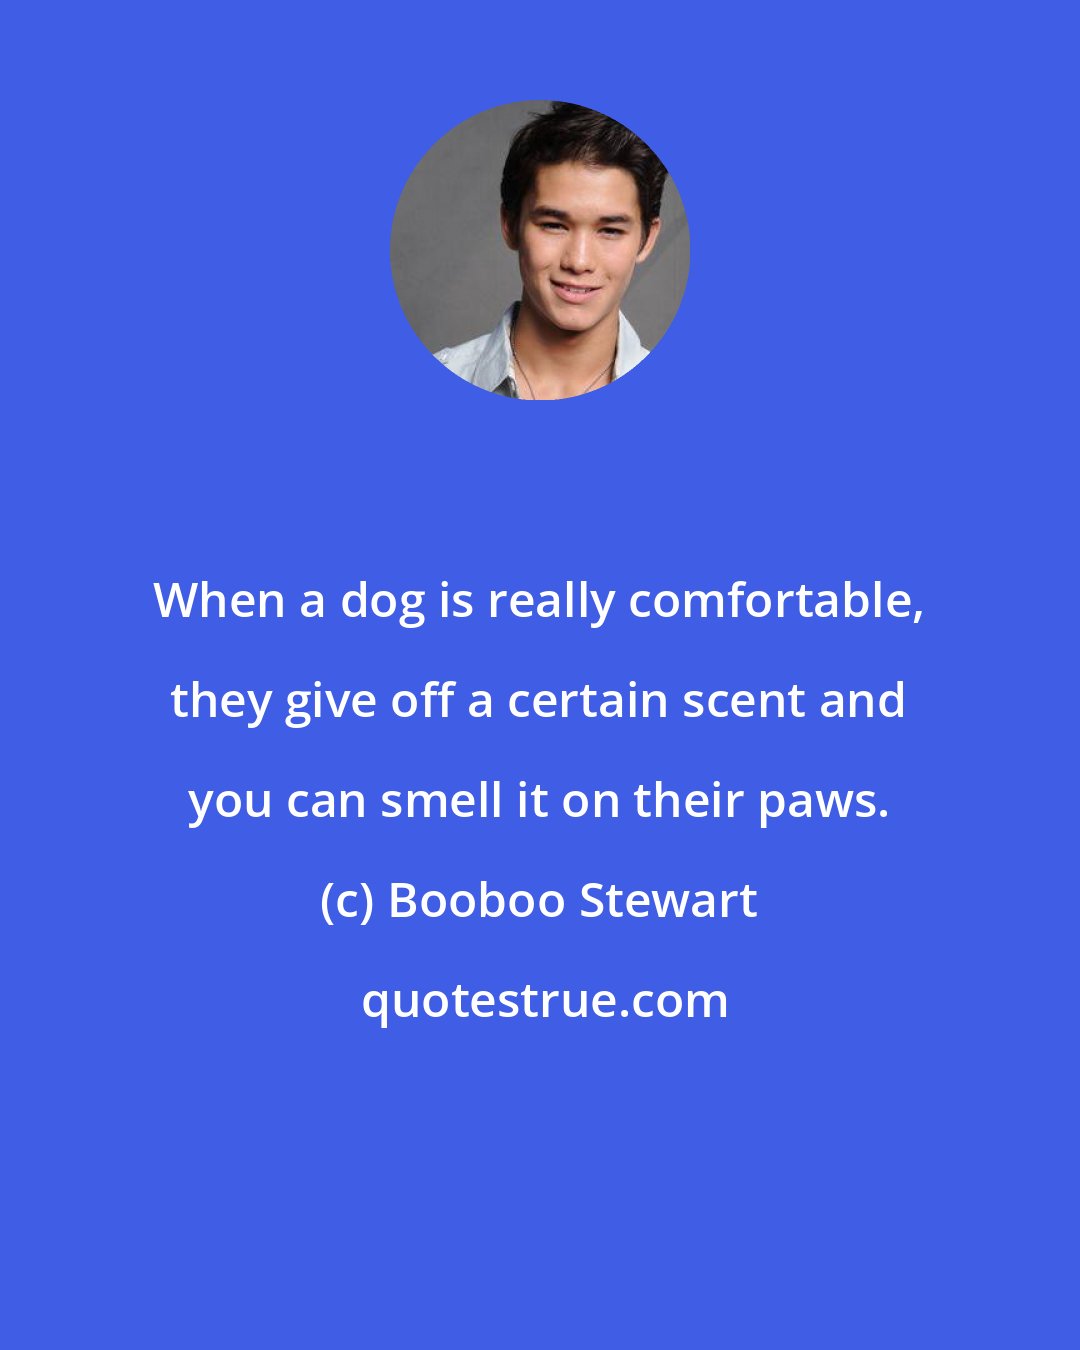 Booboo Stewart: When a dog is really comfortable, they give off a certain scent and you can smell it on their paws.